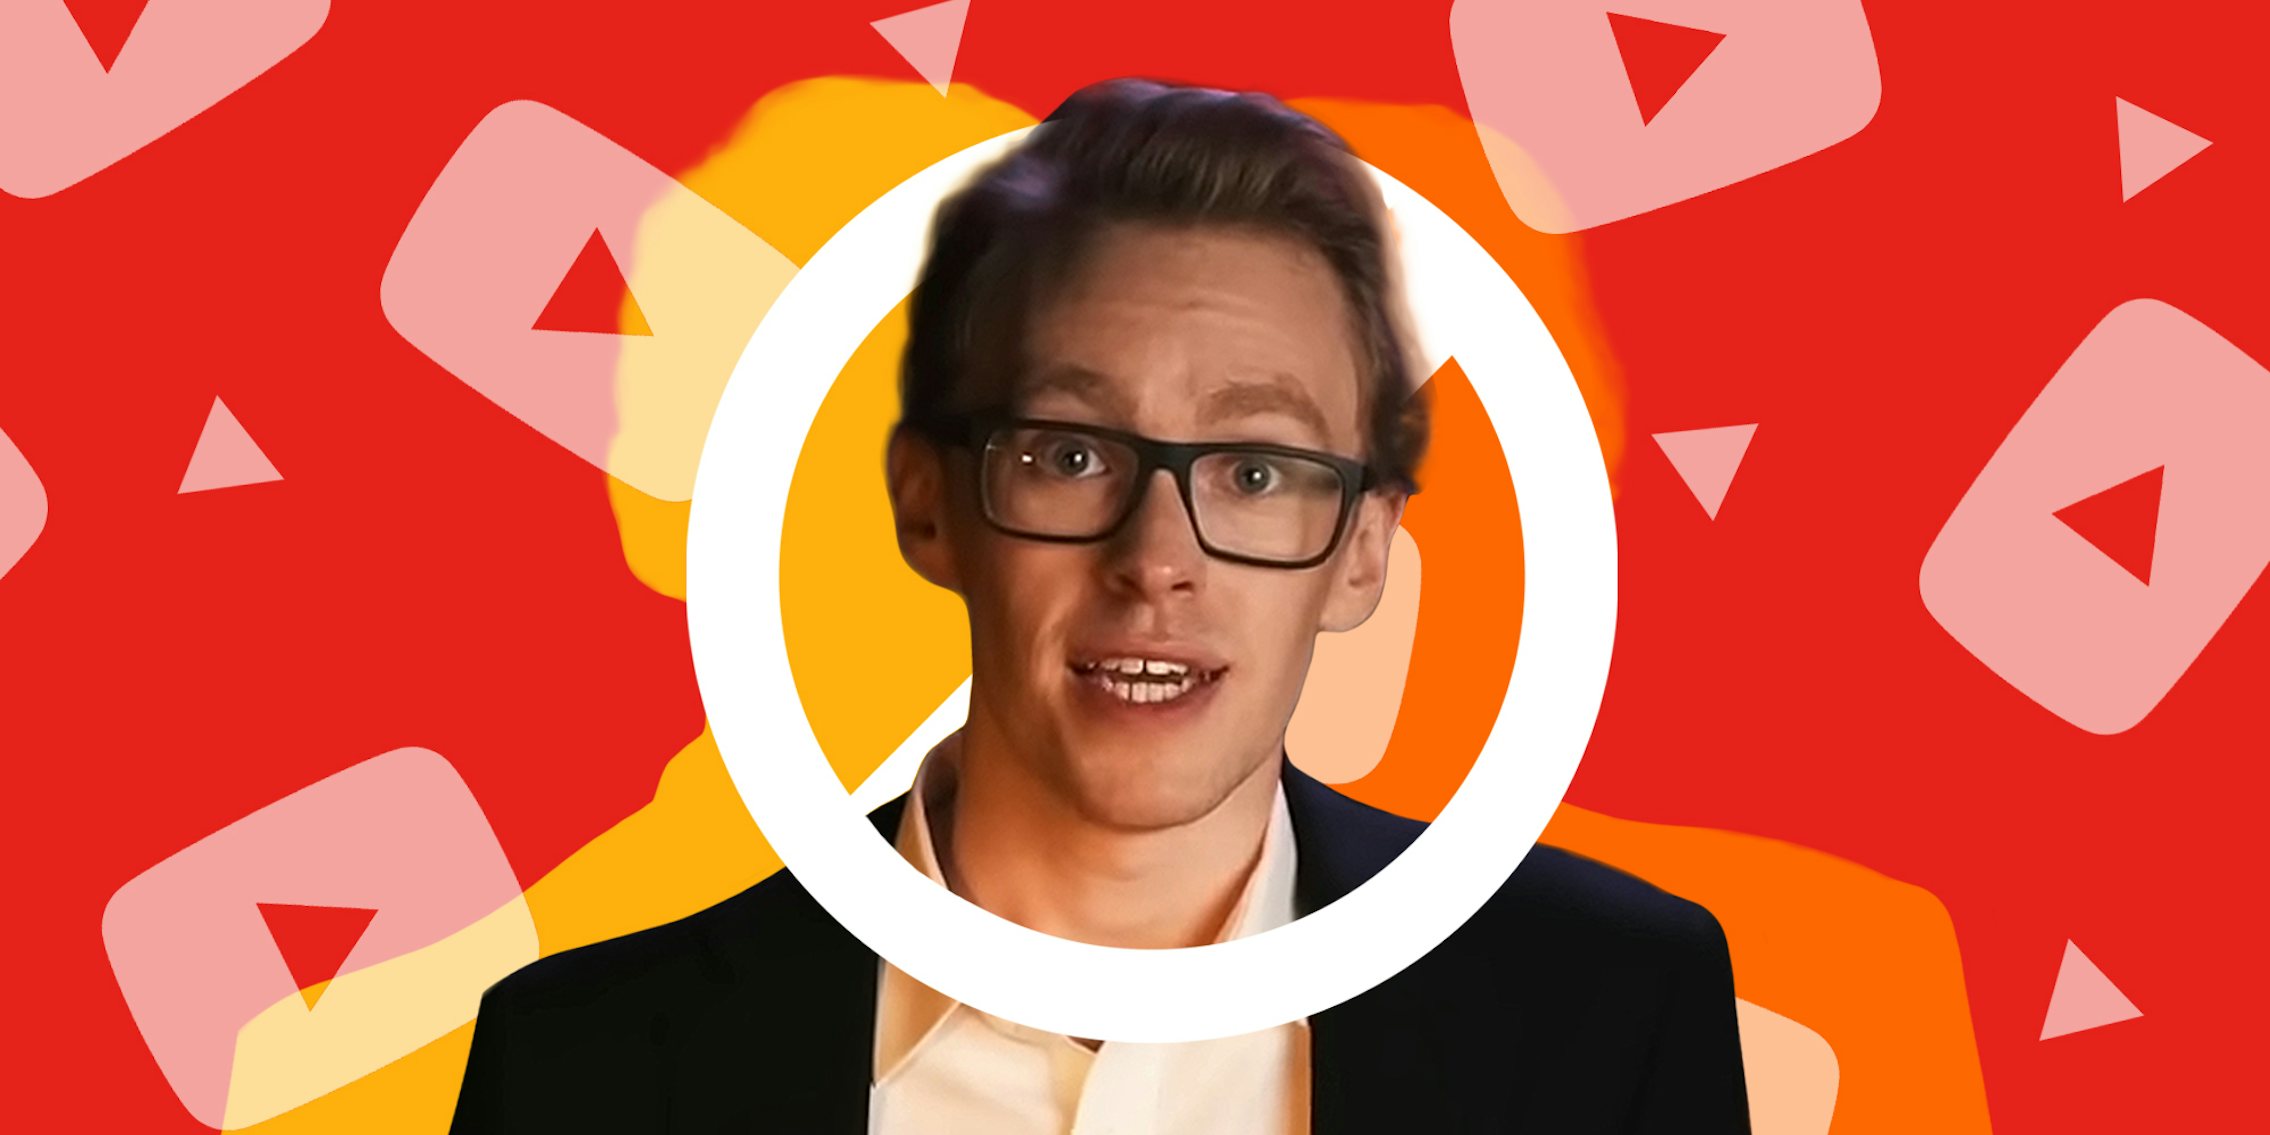 Alex Edson speaking in front of red YouTube symbol background Passionfruit Remix